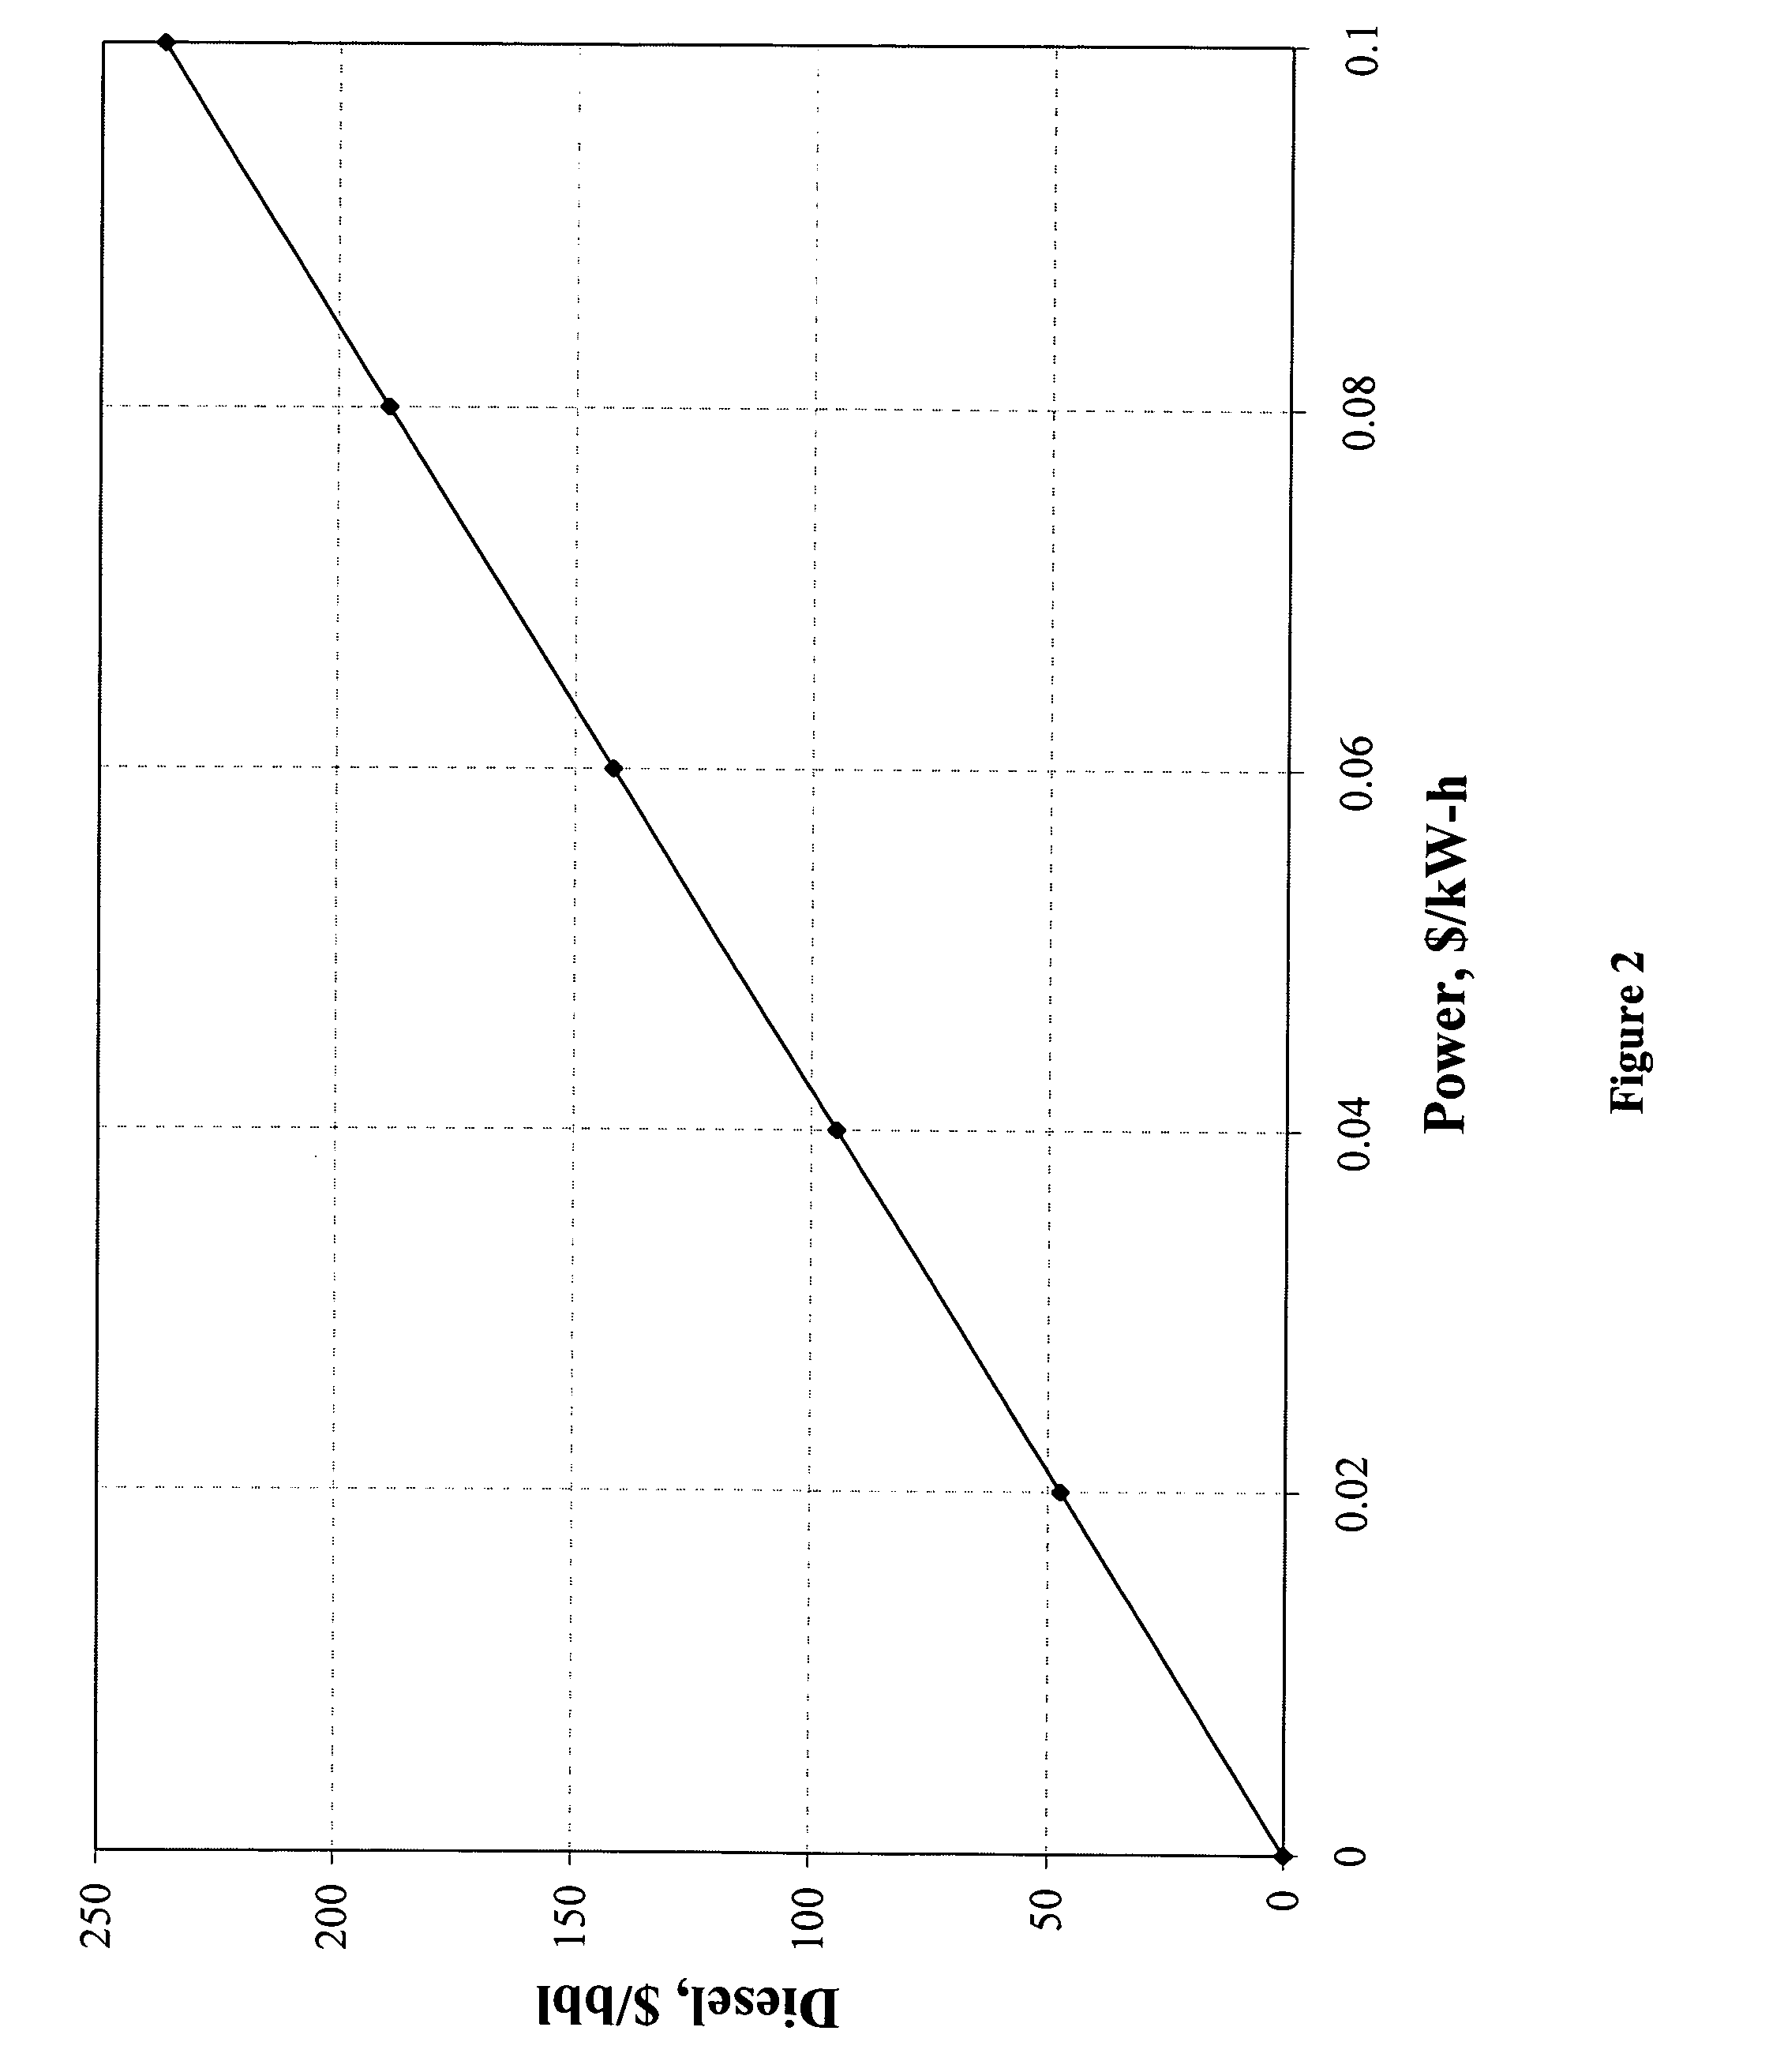 Method for providing auxiliary power to an electric power plant using fischer-tropsch technology